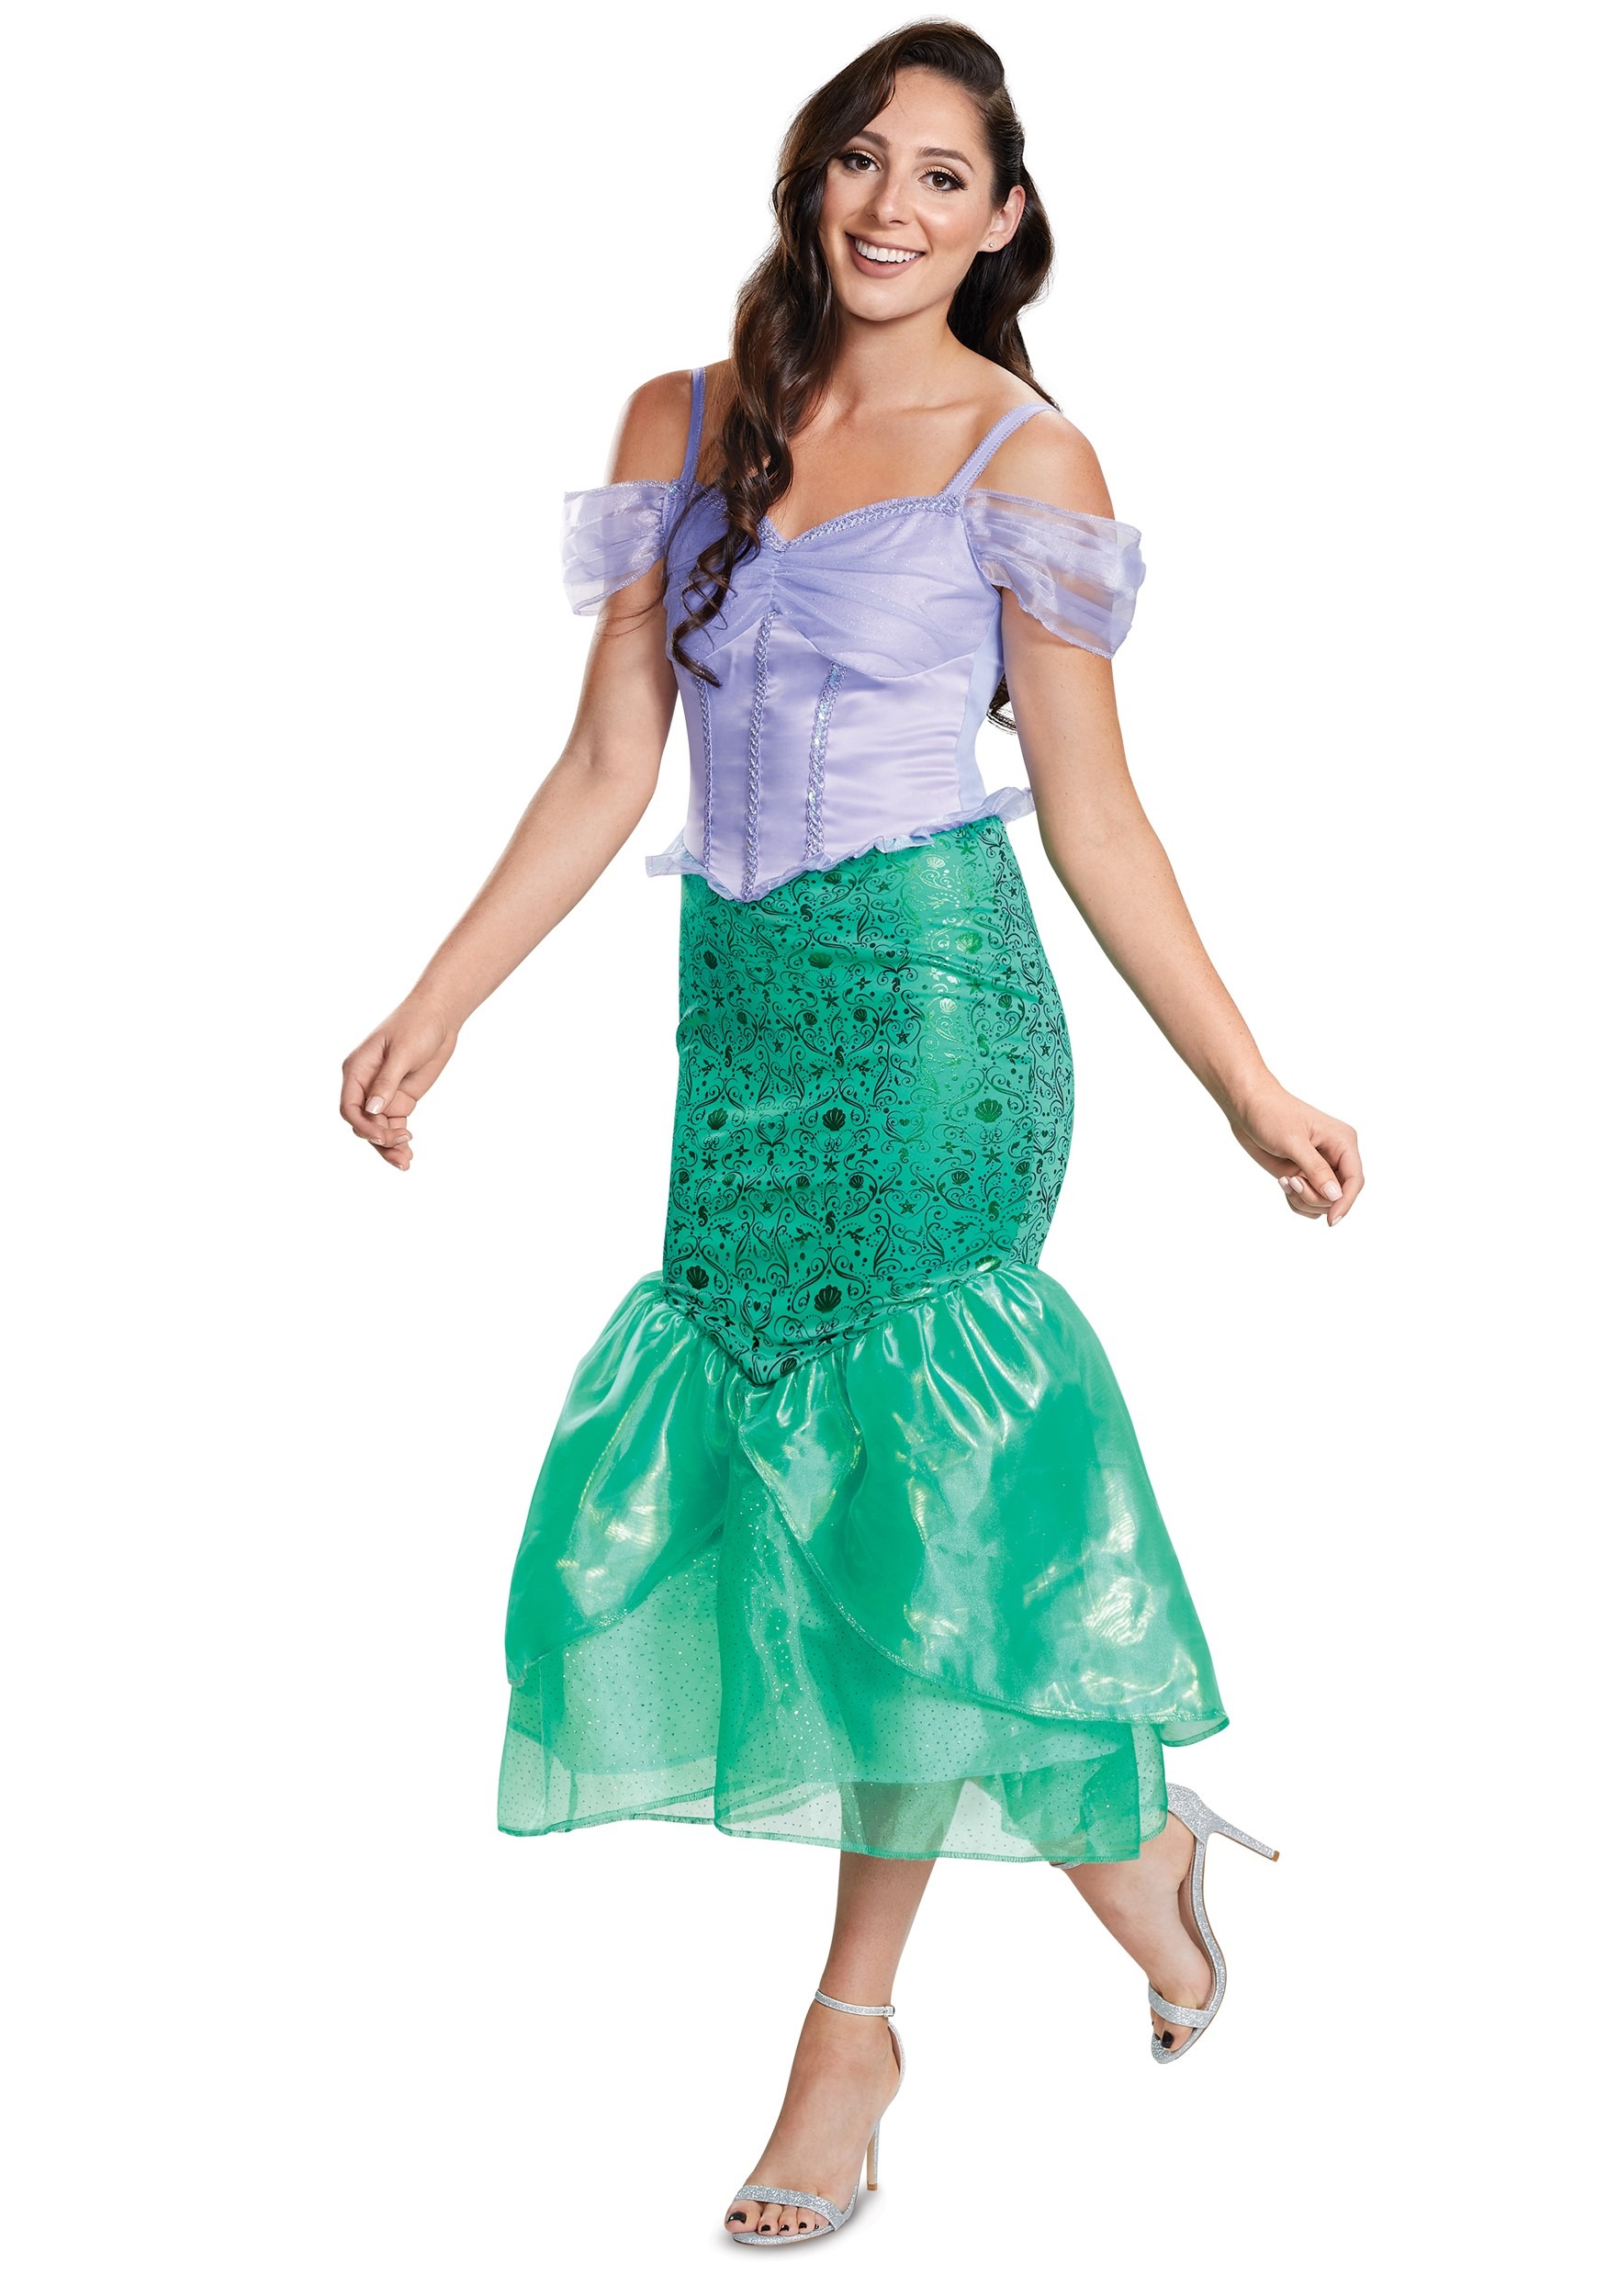 The Little Mermaid Deluxe Ariel Costume For Adults | lupon.gov.ph